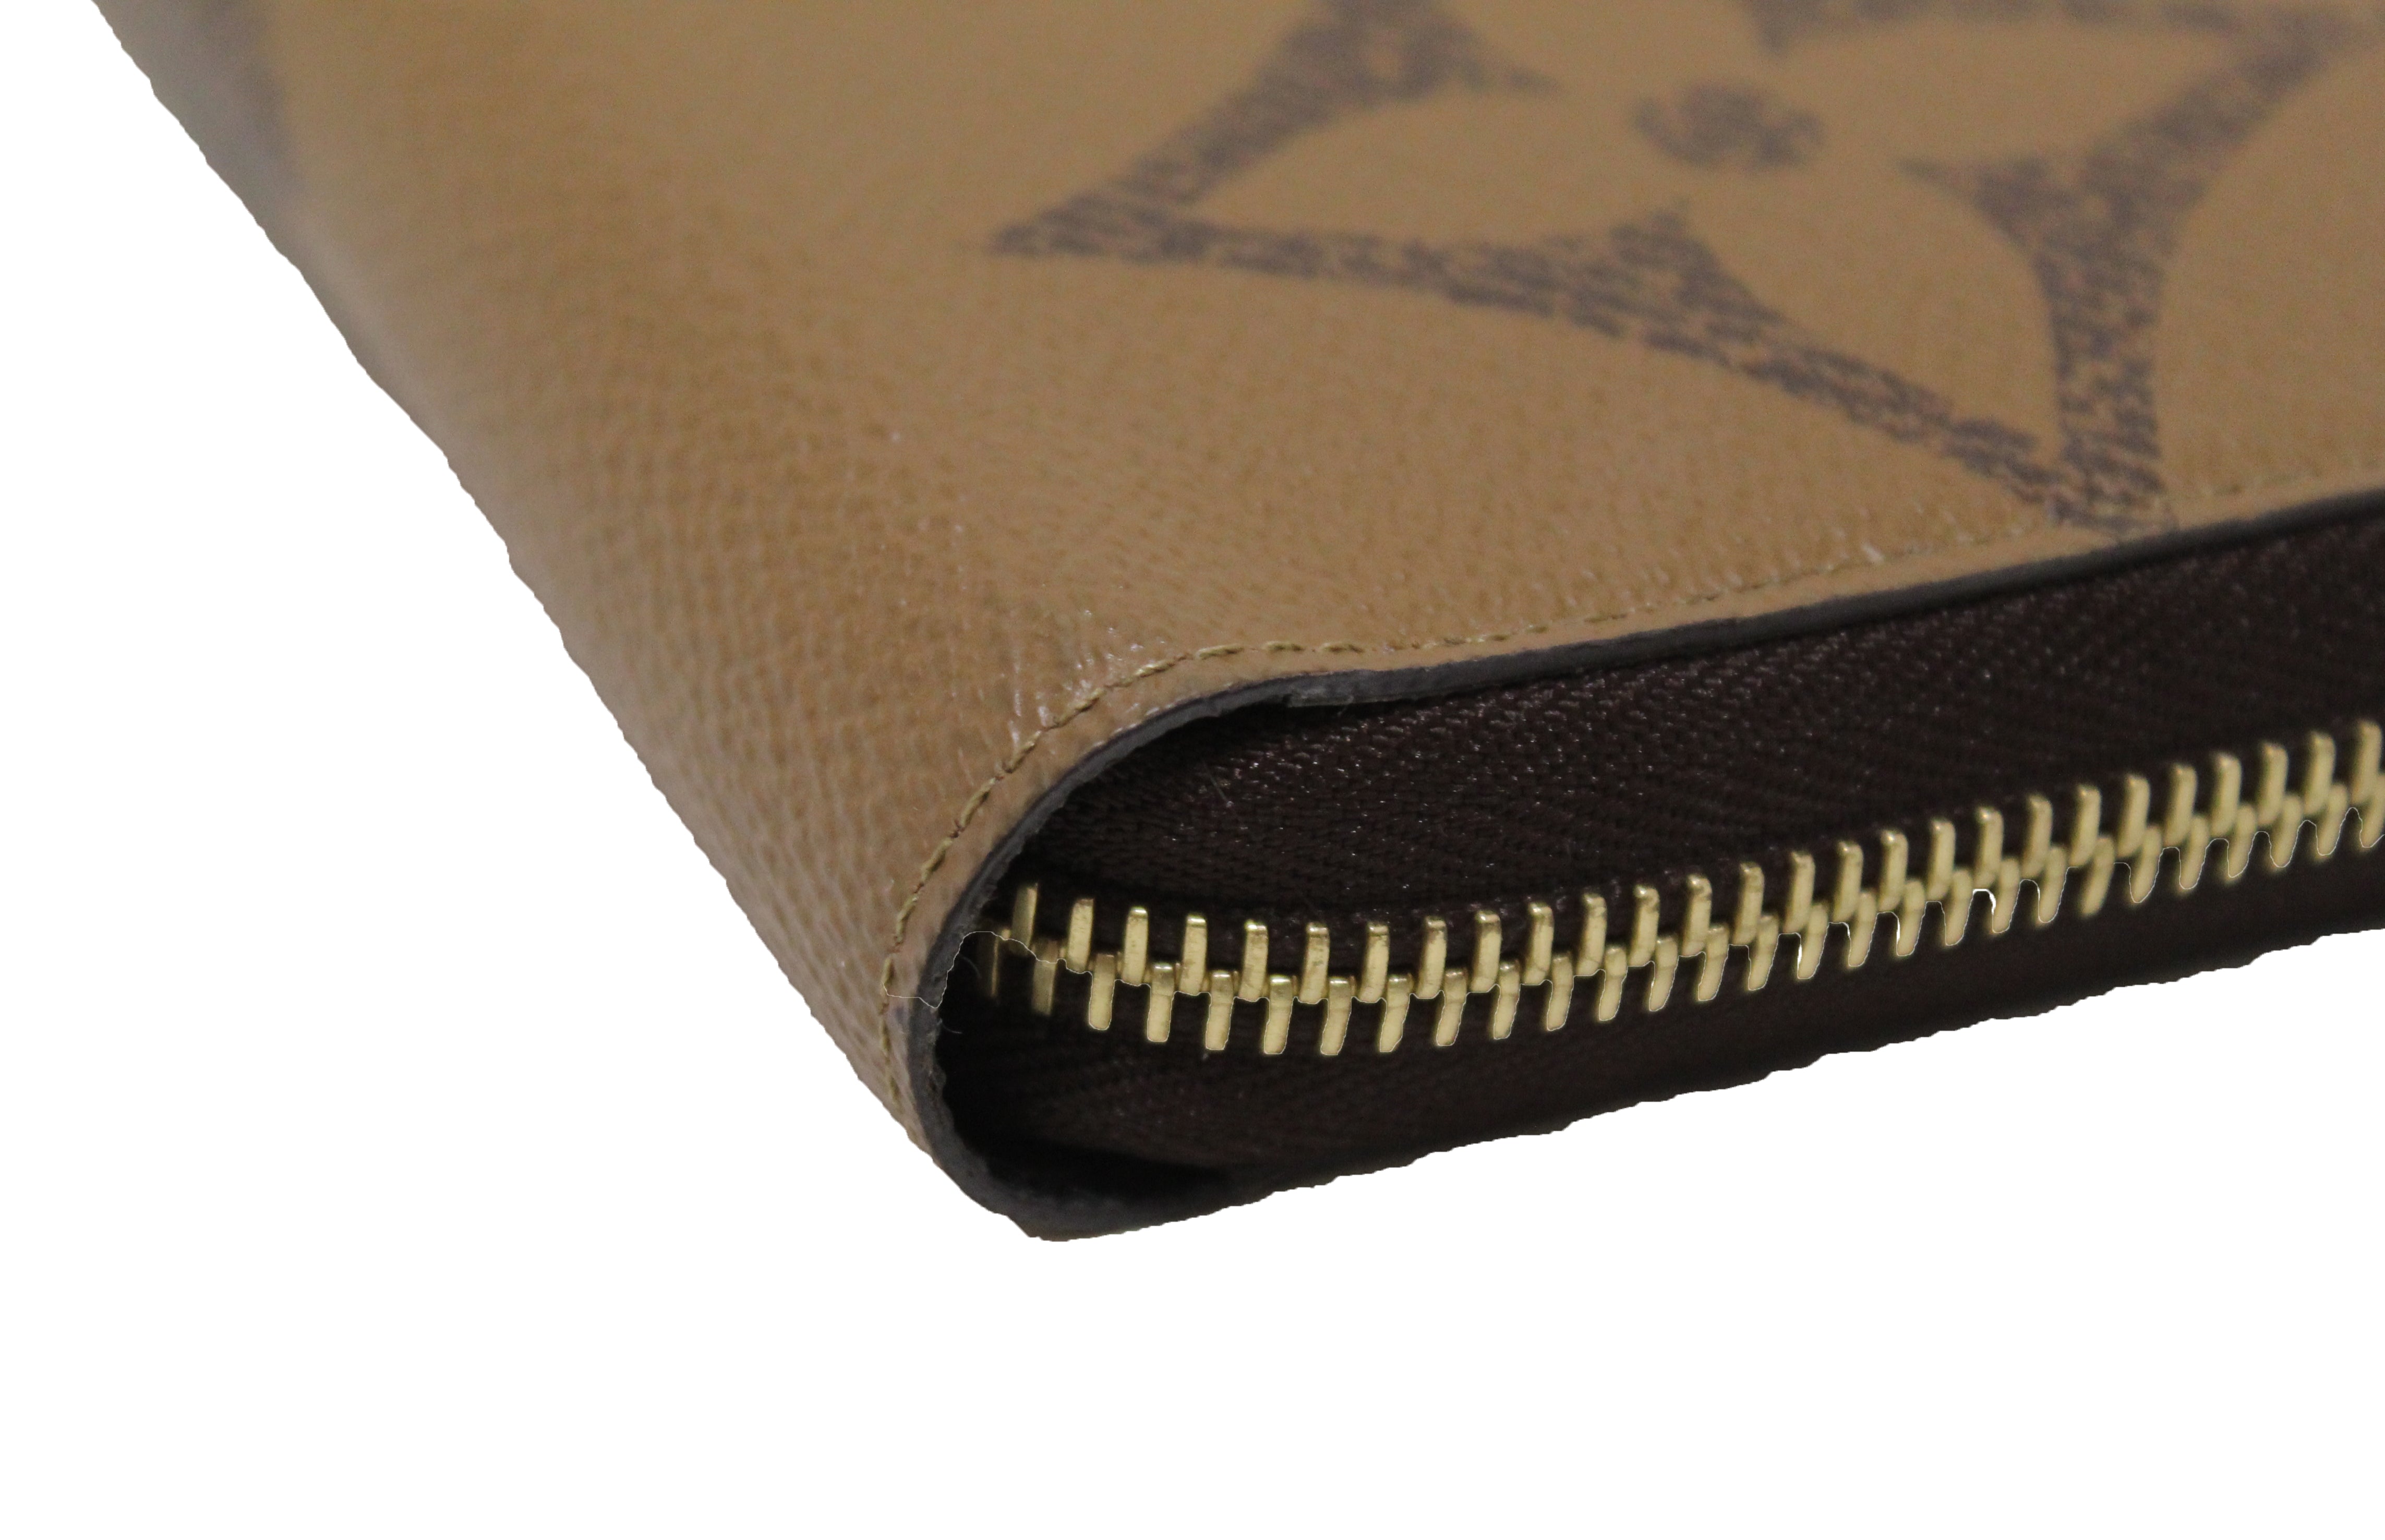 Zippy Wallet Monogram Reverse Canvas - Wallets and Small Leather Goods